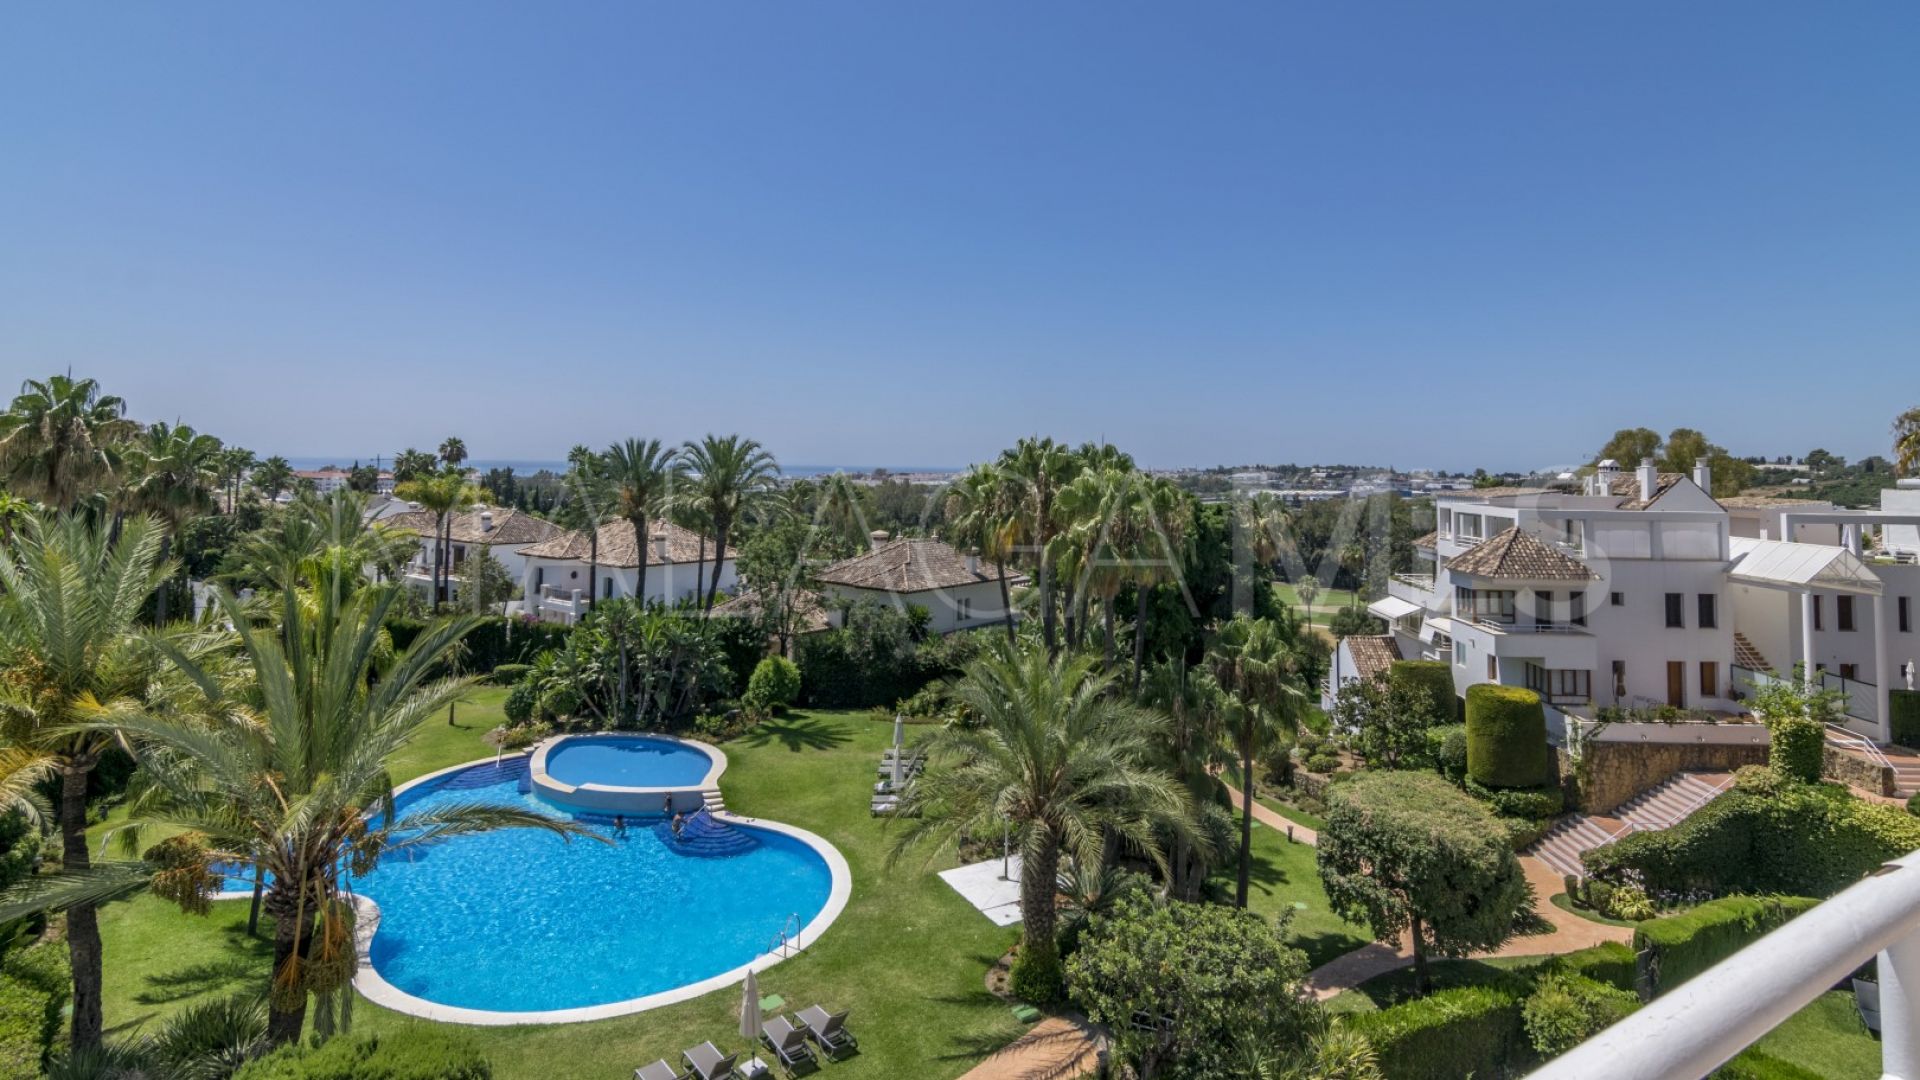 4 bedrooms duplex penthouse in Alcores del Golf for sale